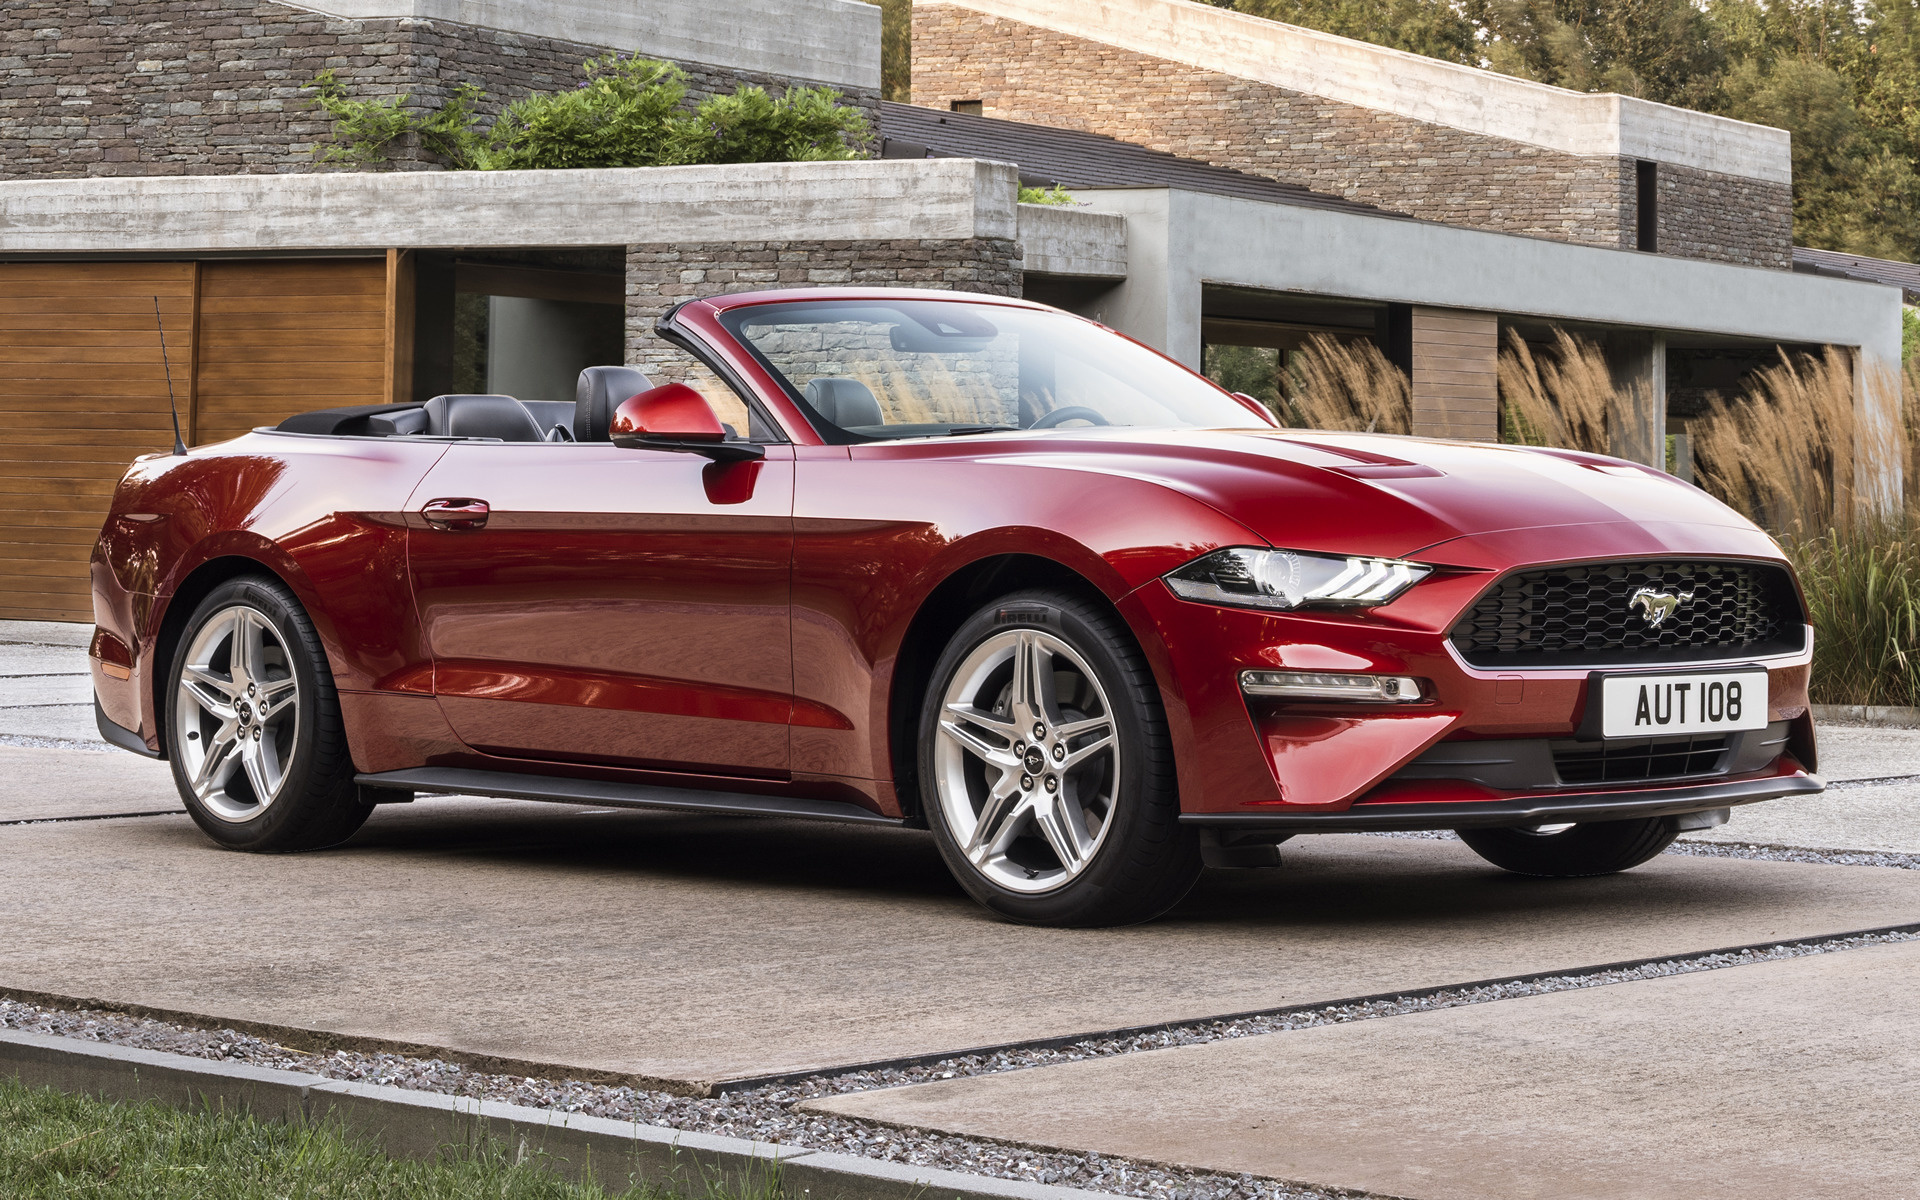 2018 Ford Mustang Convertible (EU) - Wallpapers and HD Images | Car Pixel